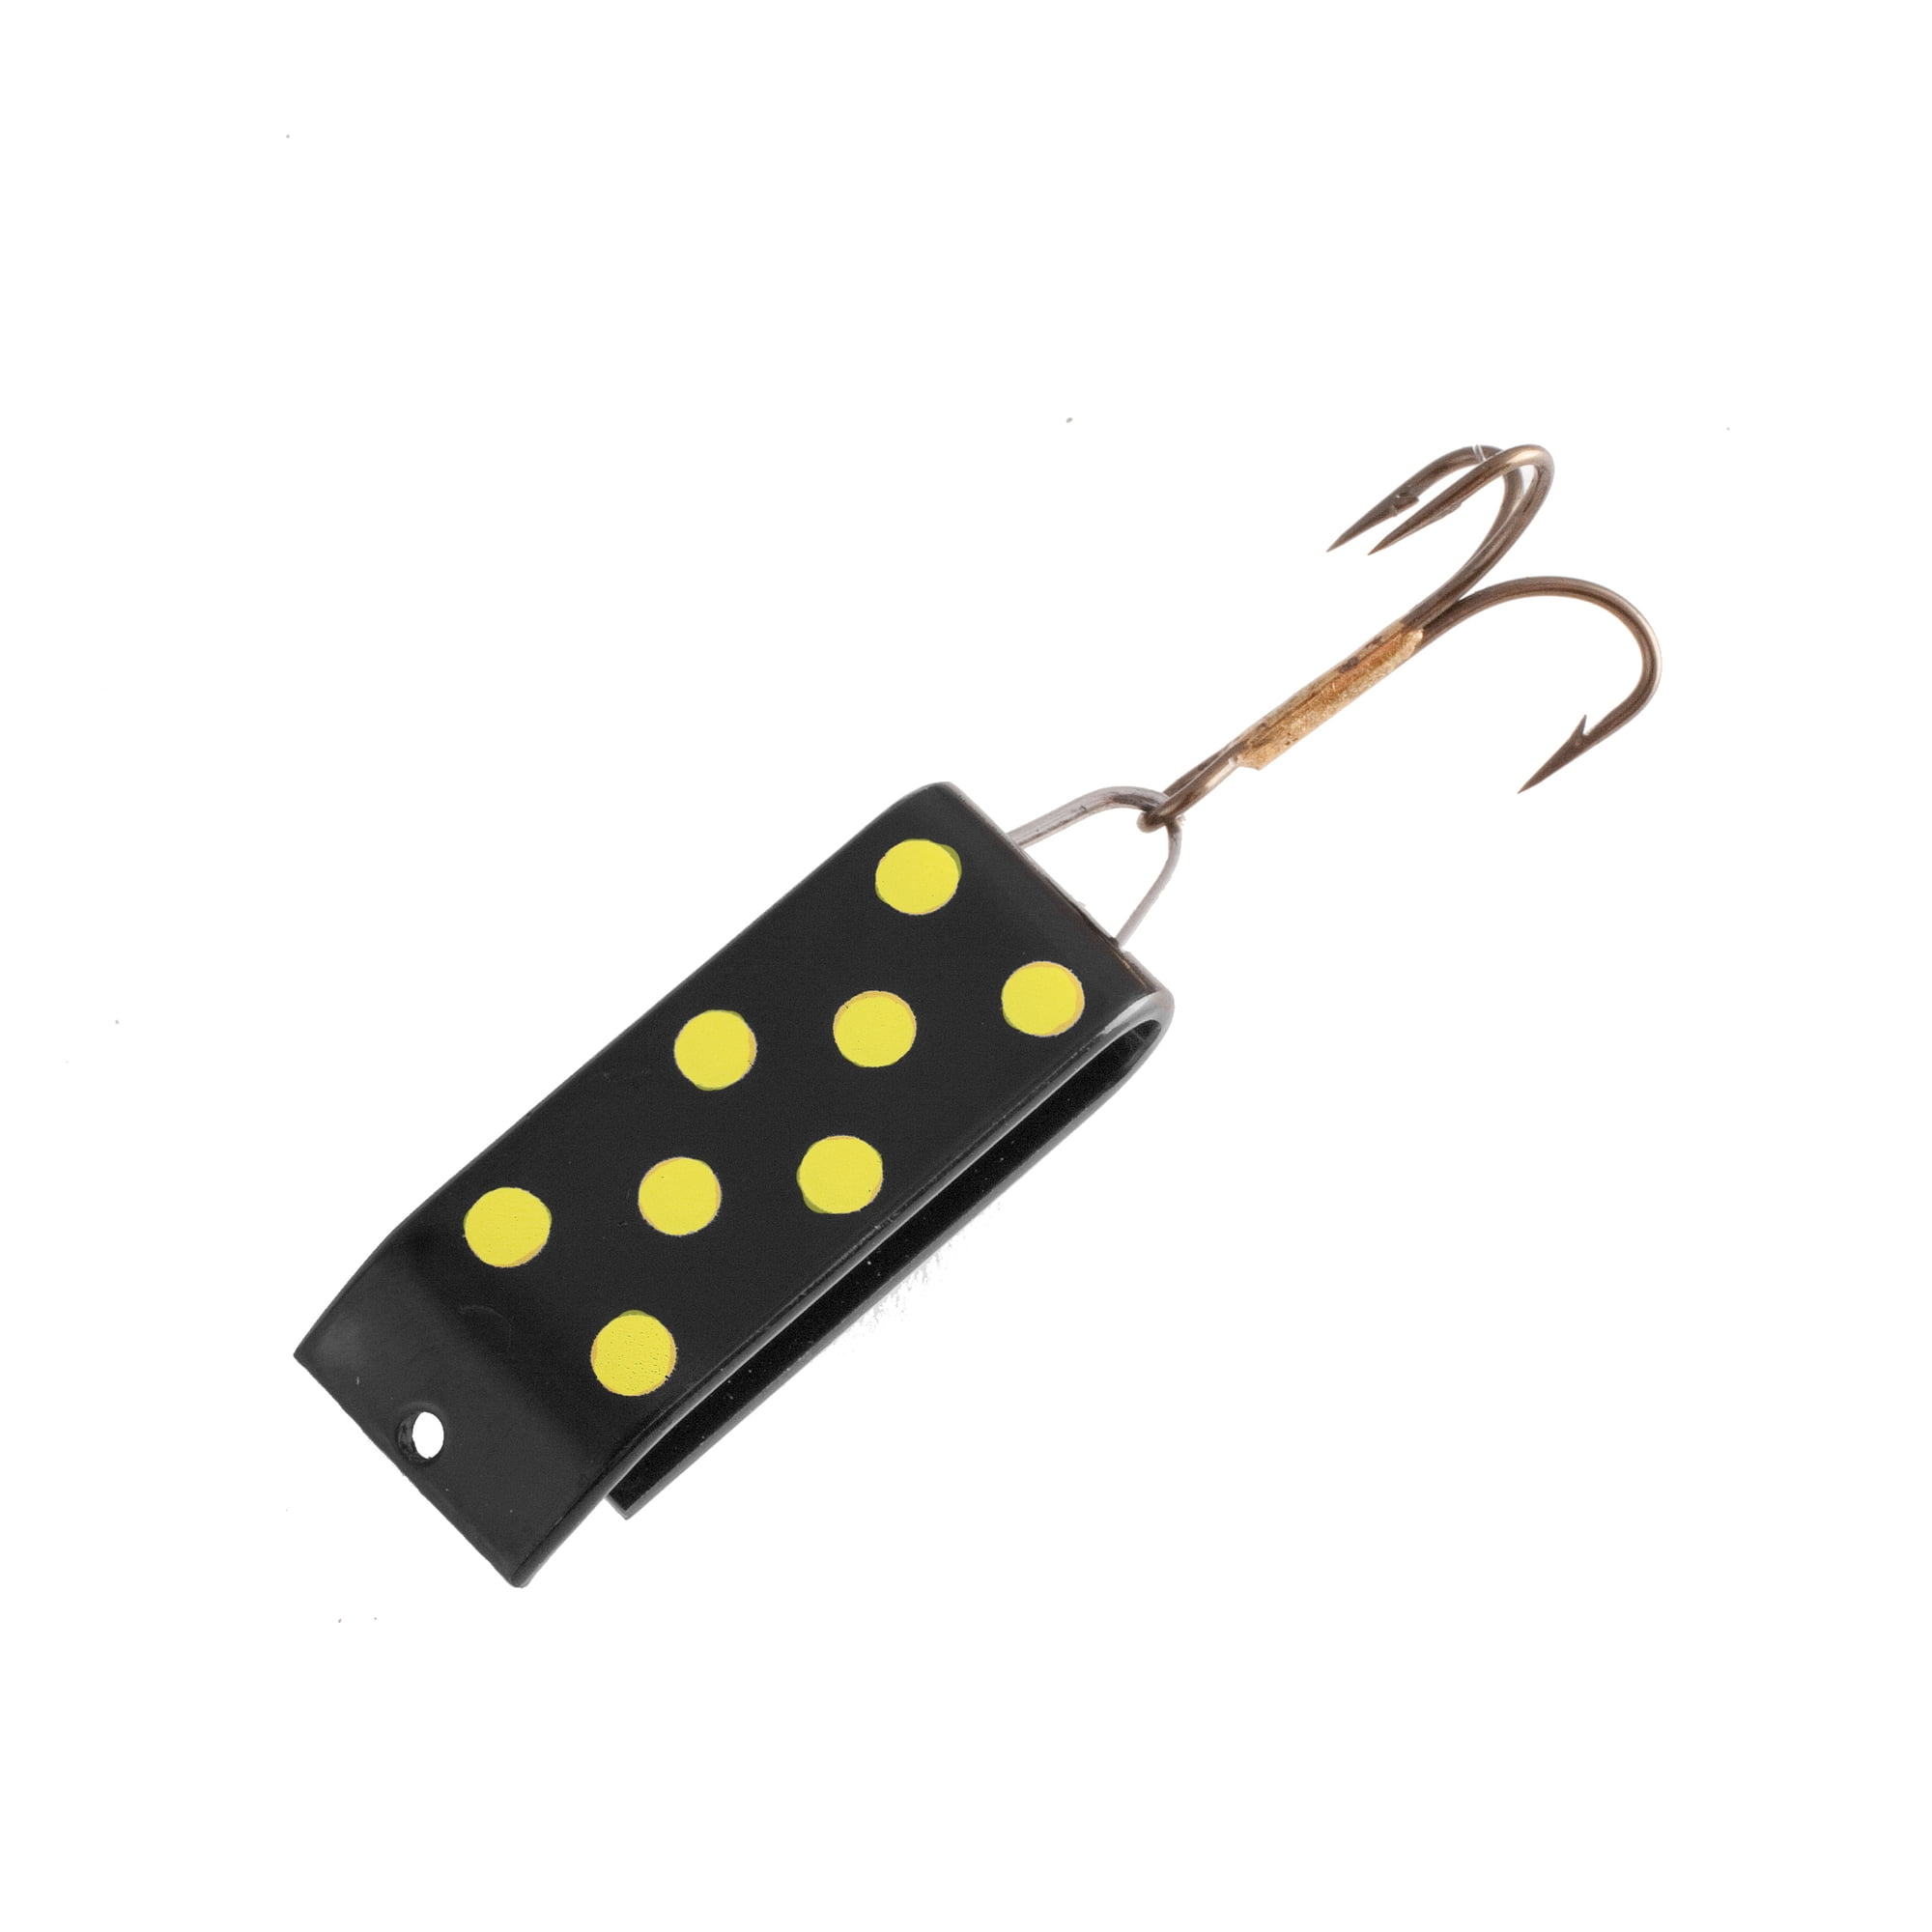 Jake's Lure Spin-A-Lure, Black/Yellow